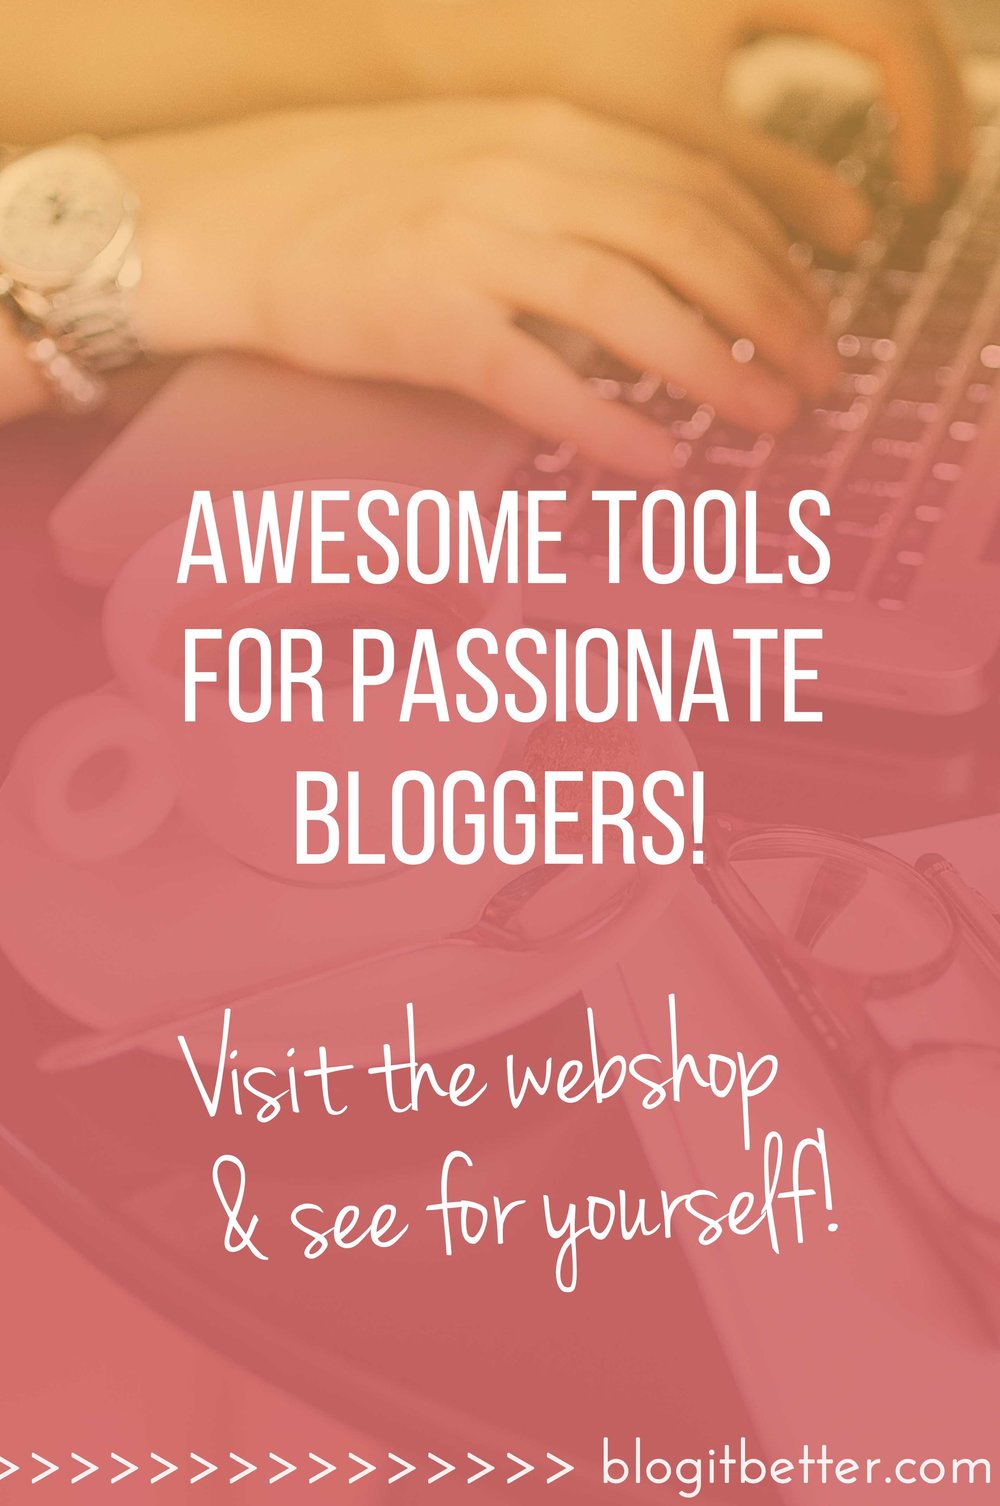 Visit the webshop to find a range of awesome tools and services for passionate bloggers! Created by Kristine Ofstad for Blog it Better